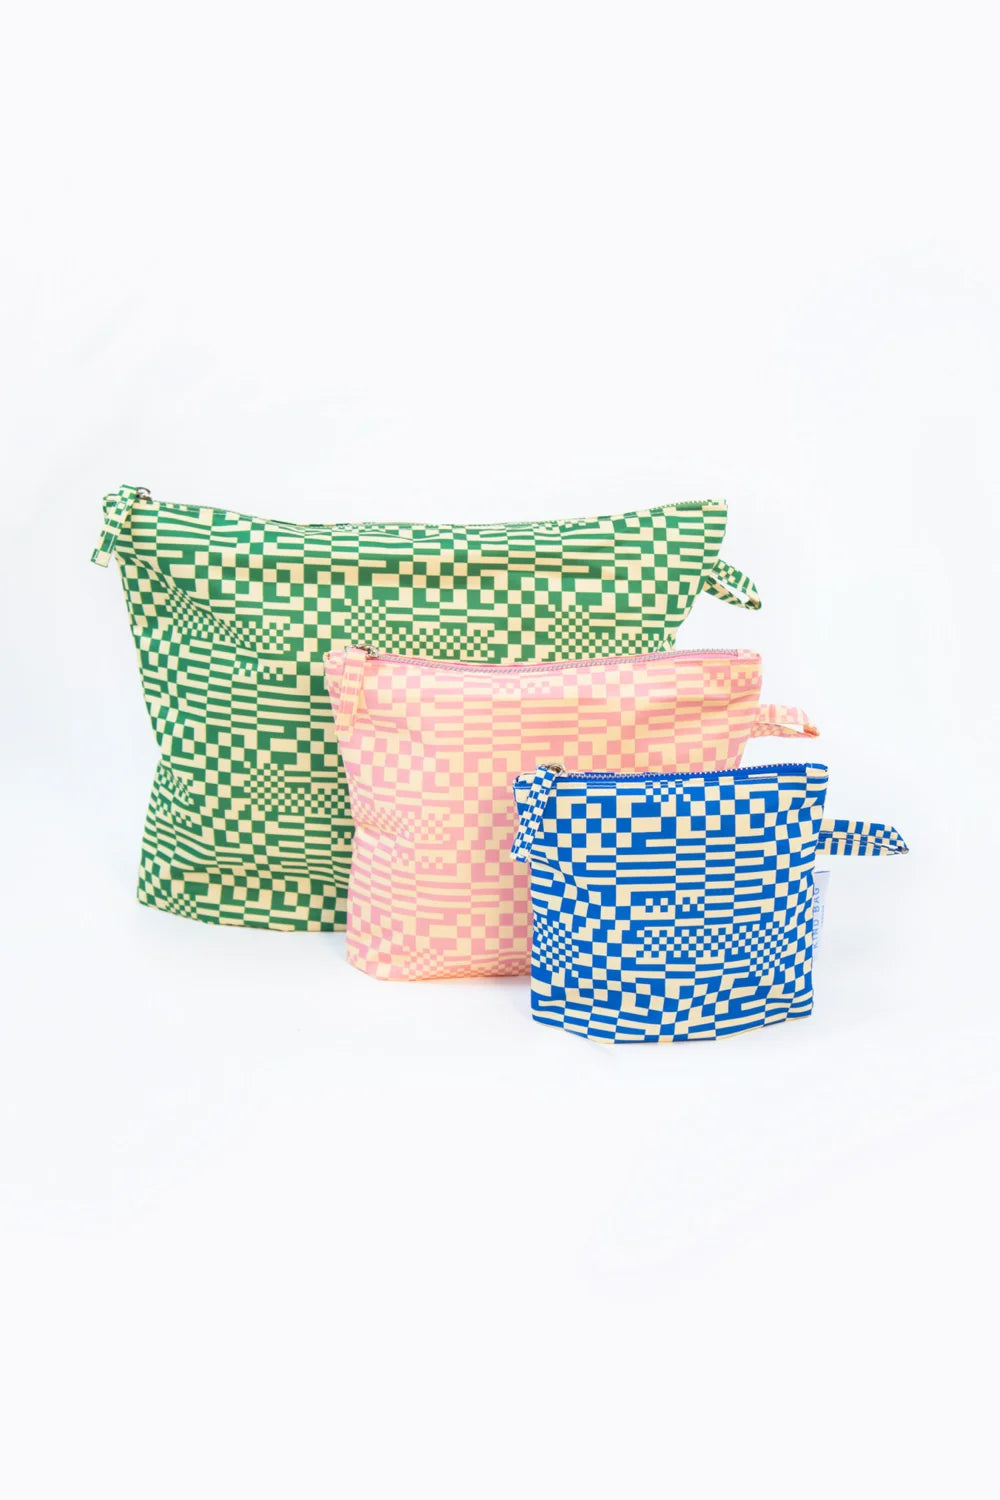 Kind Bag Pouches, set of 3 - Trippy Check